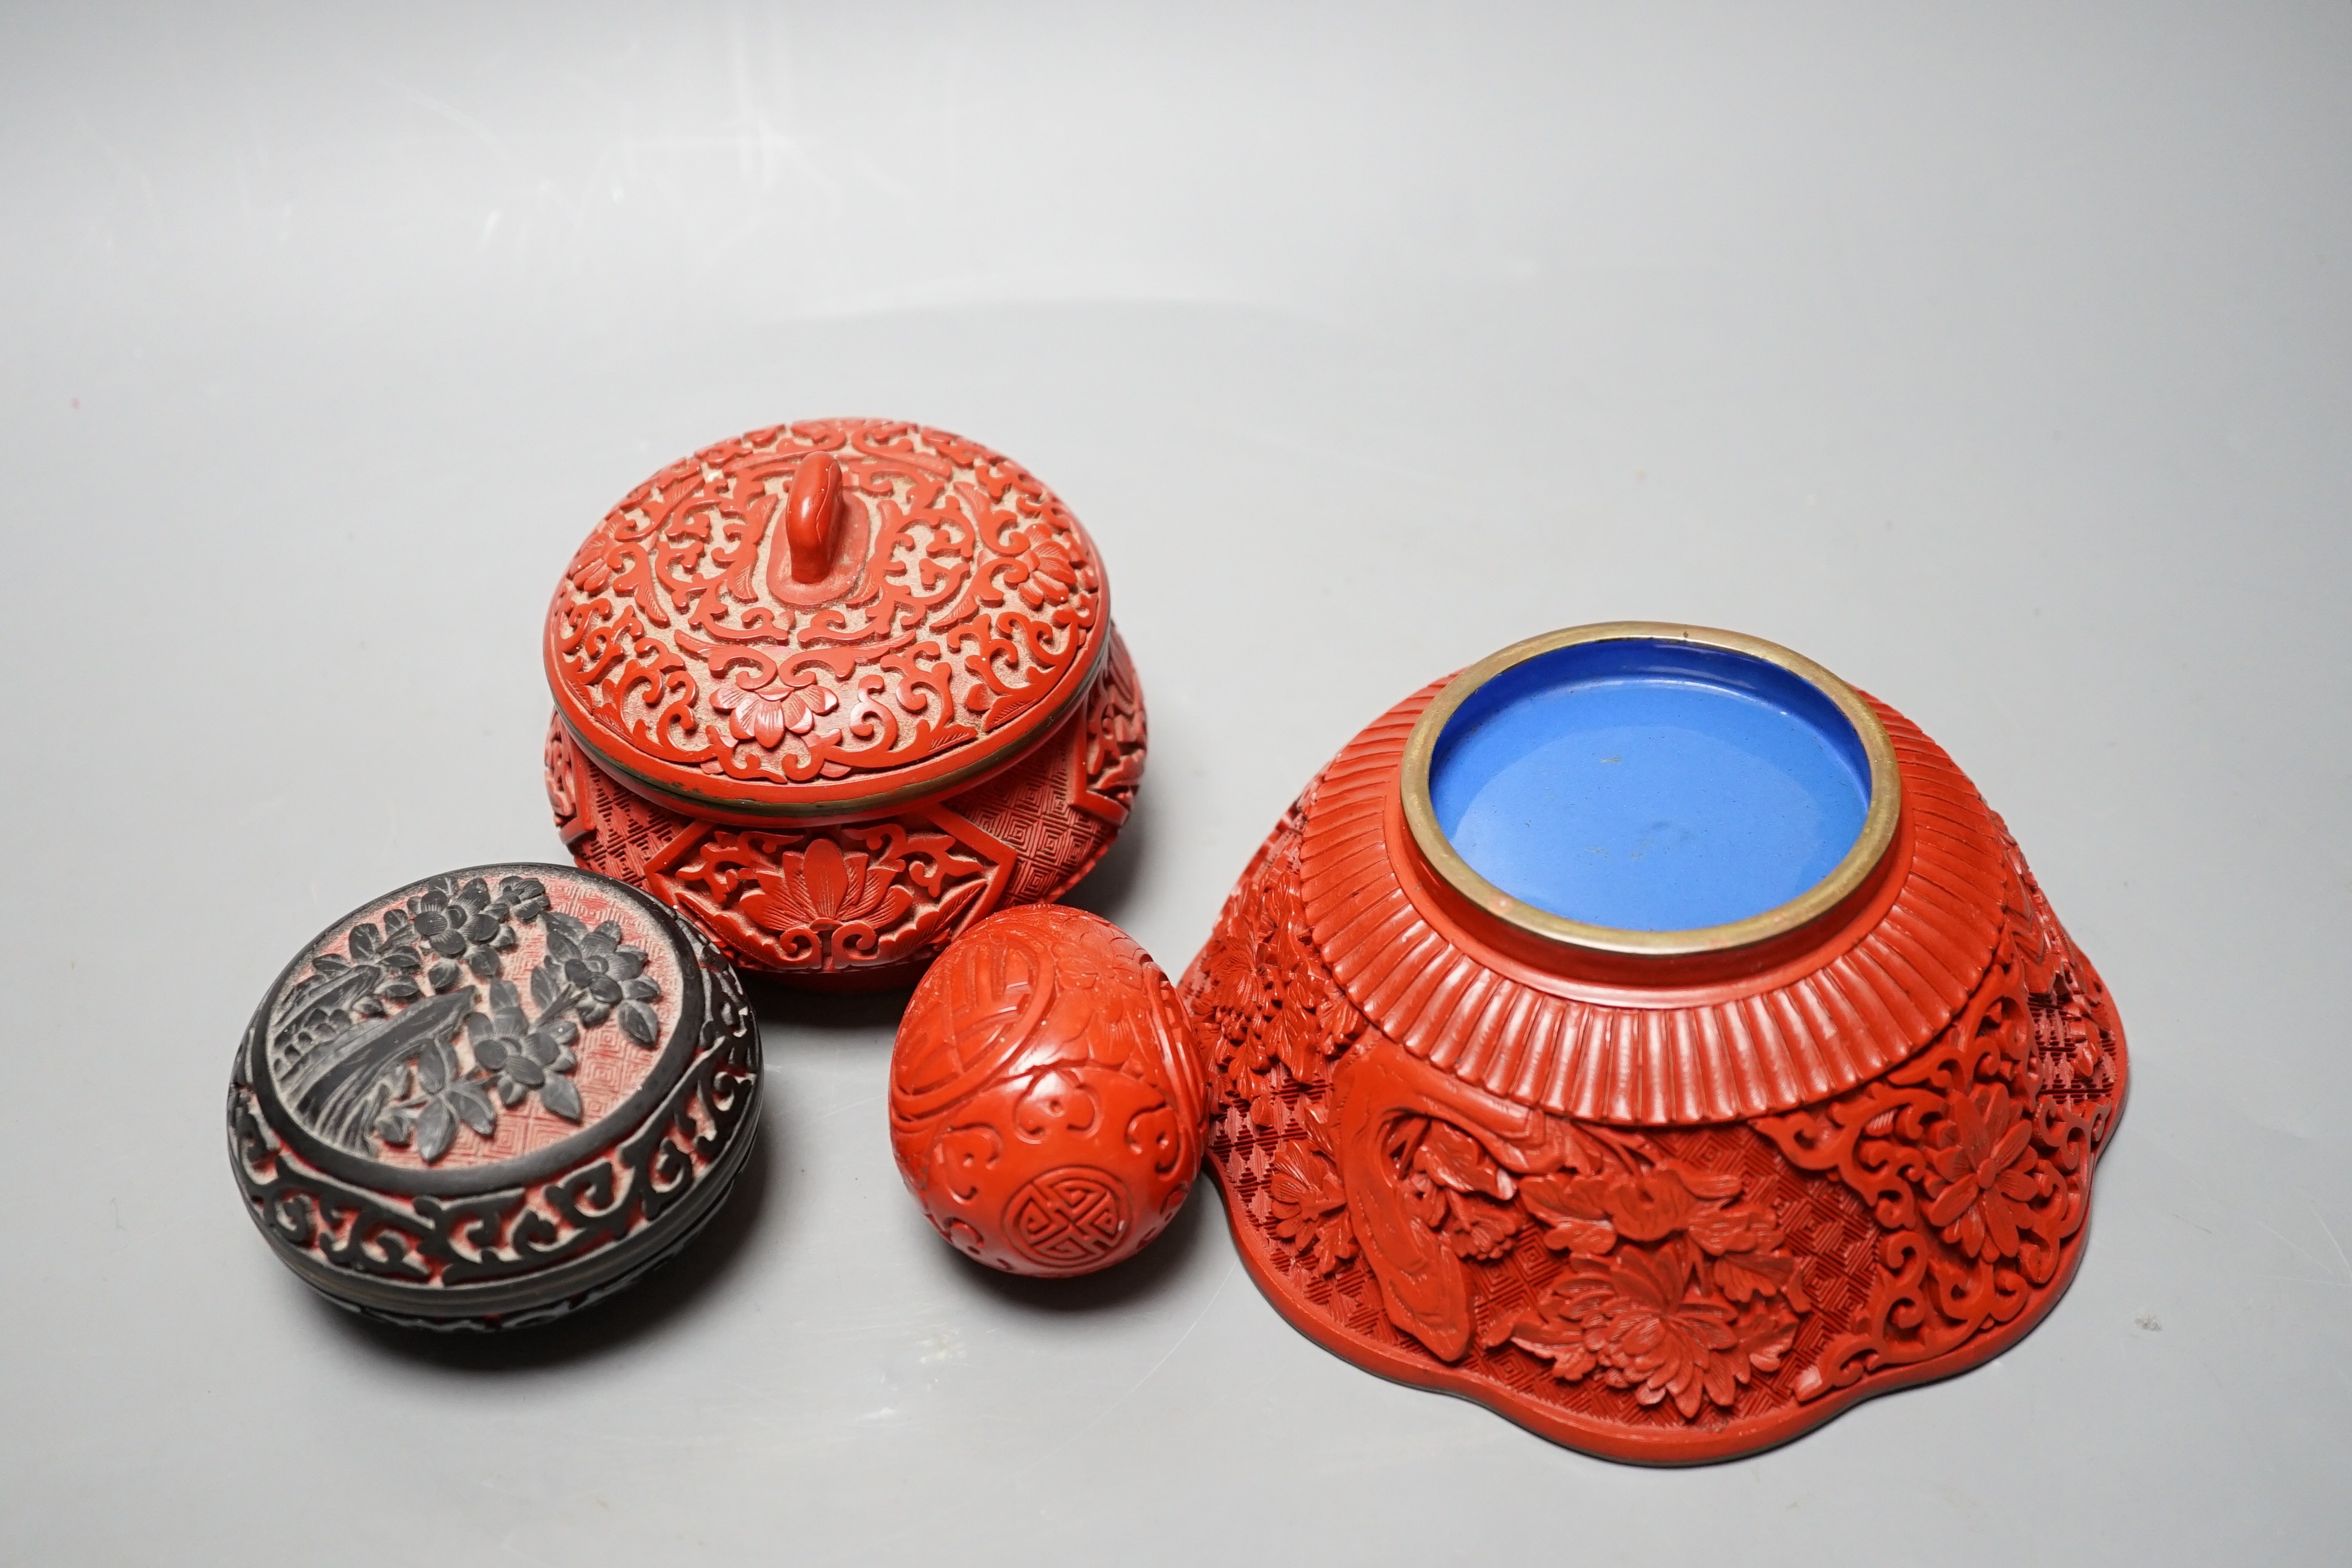 A Chinese cinnabar lacquer bowl, 15cm a similar covered box and egg, and a carved circular box and cover